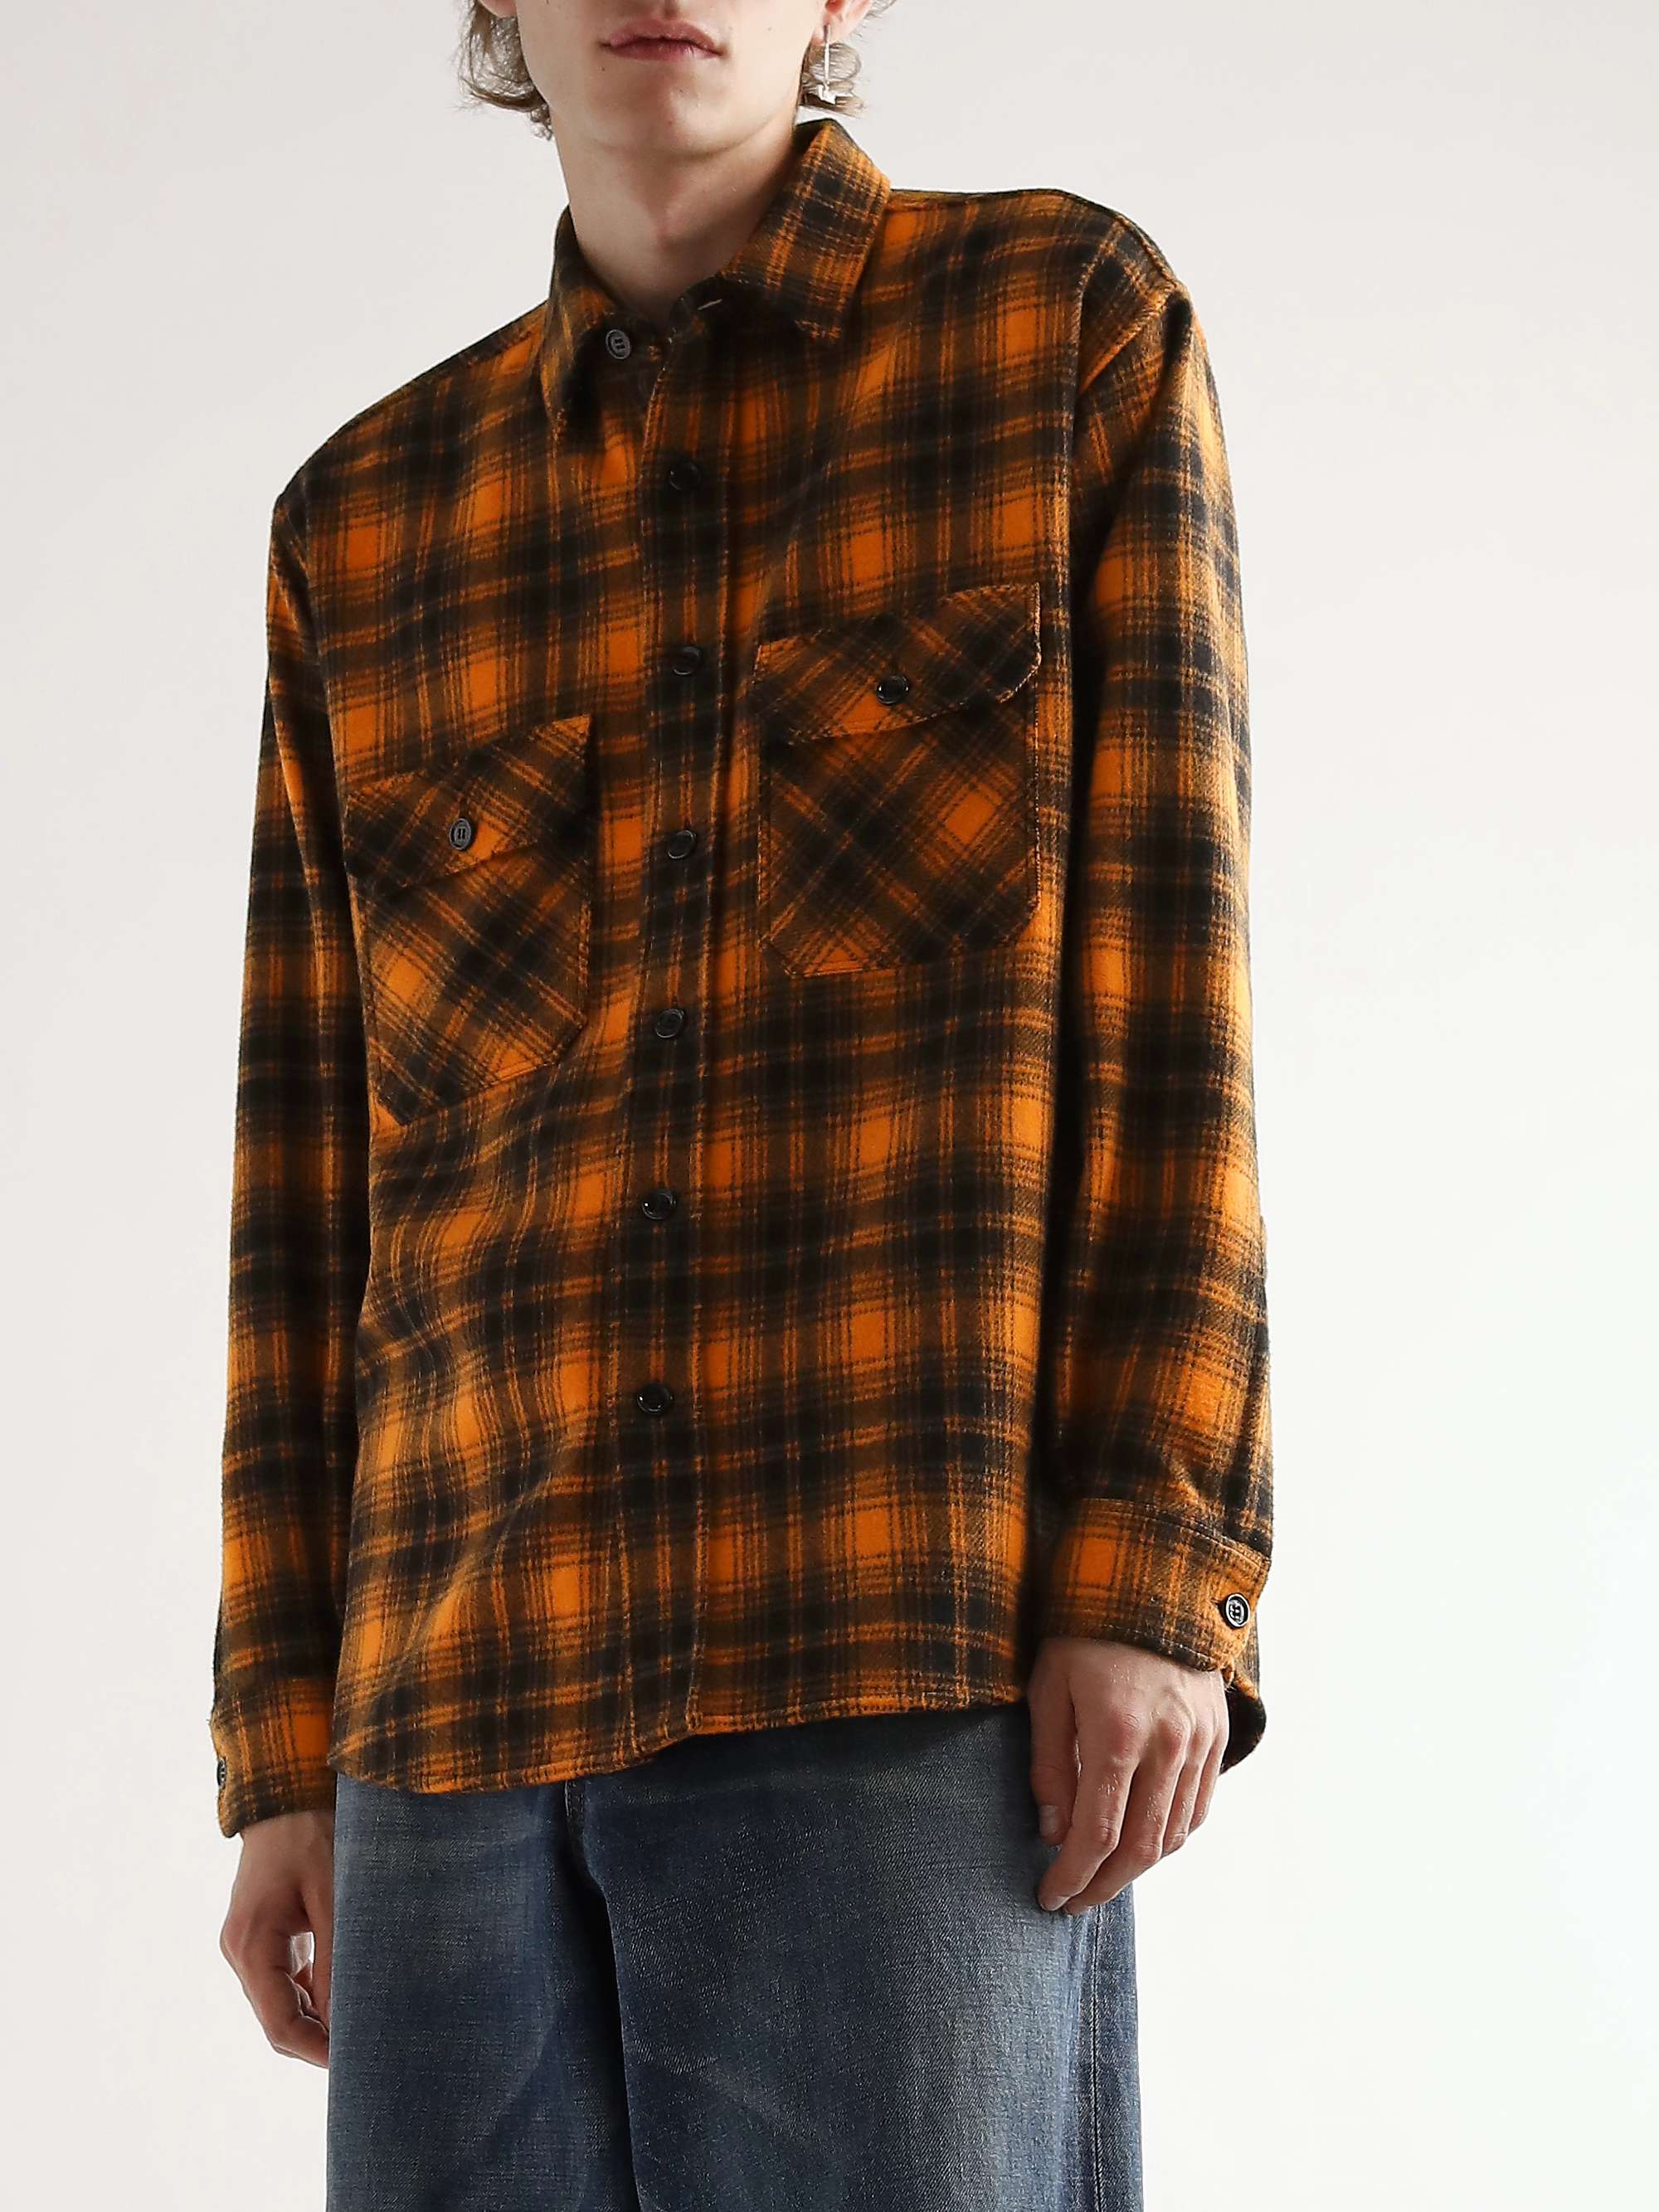 CELINE HOMME Checked Wool-Blend Flannel Shirt